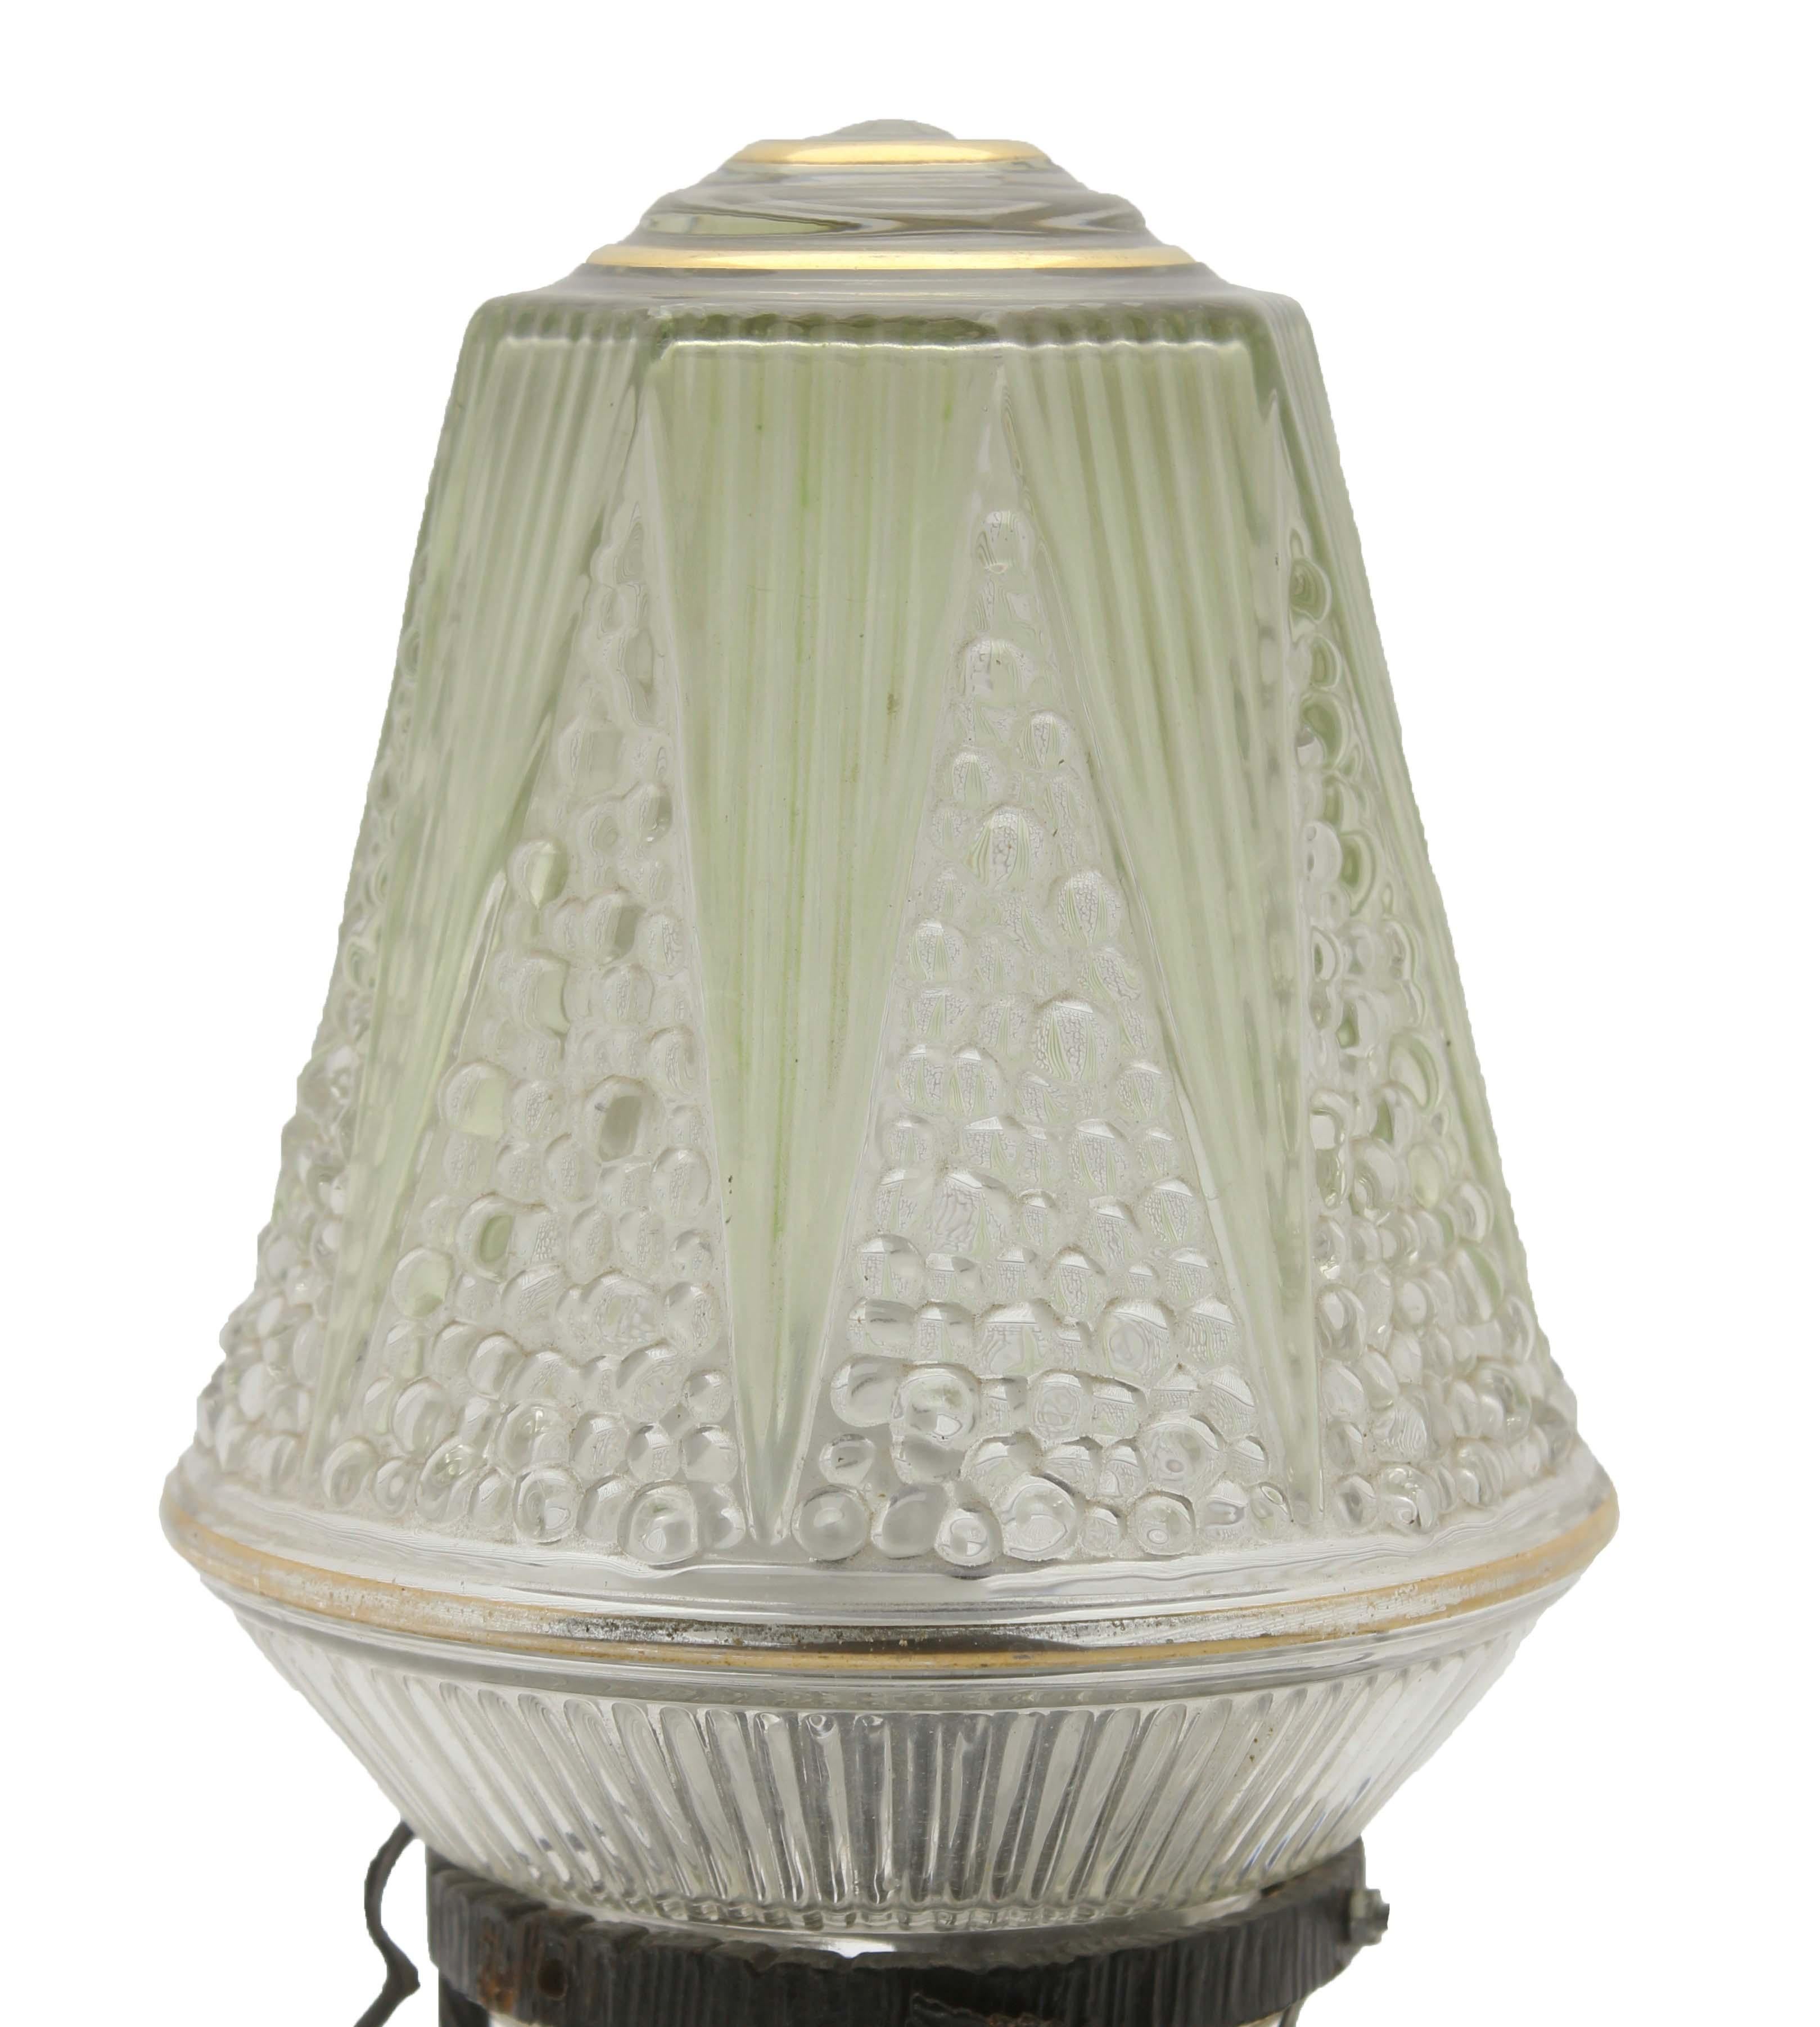 Hand-Crafted French Art Deco Lamp in Wrought Iron with Floral Pattern and Colored Glass Shade